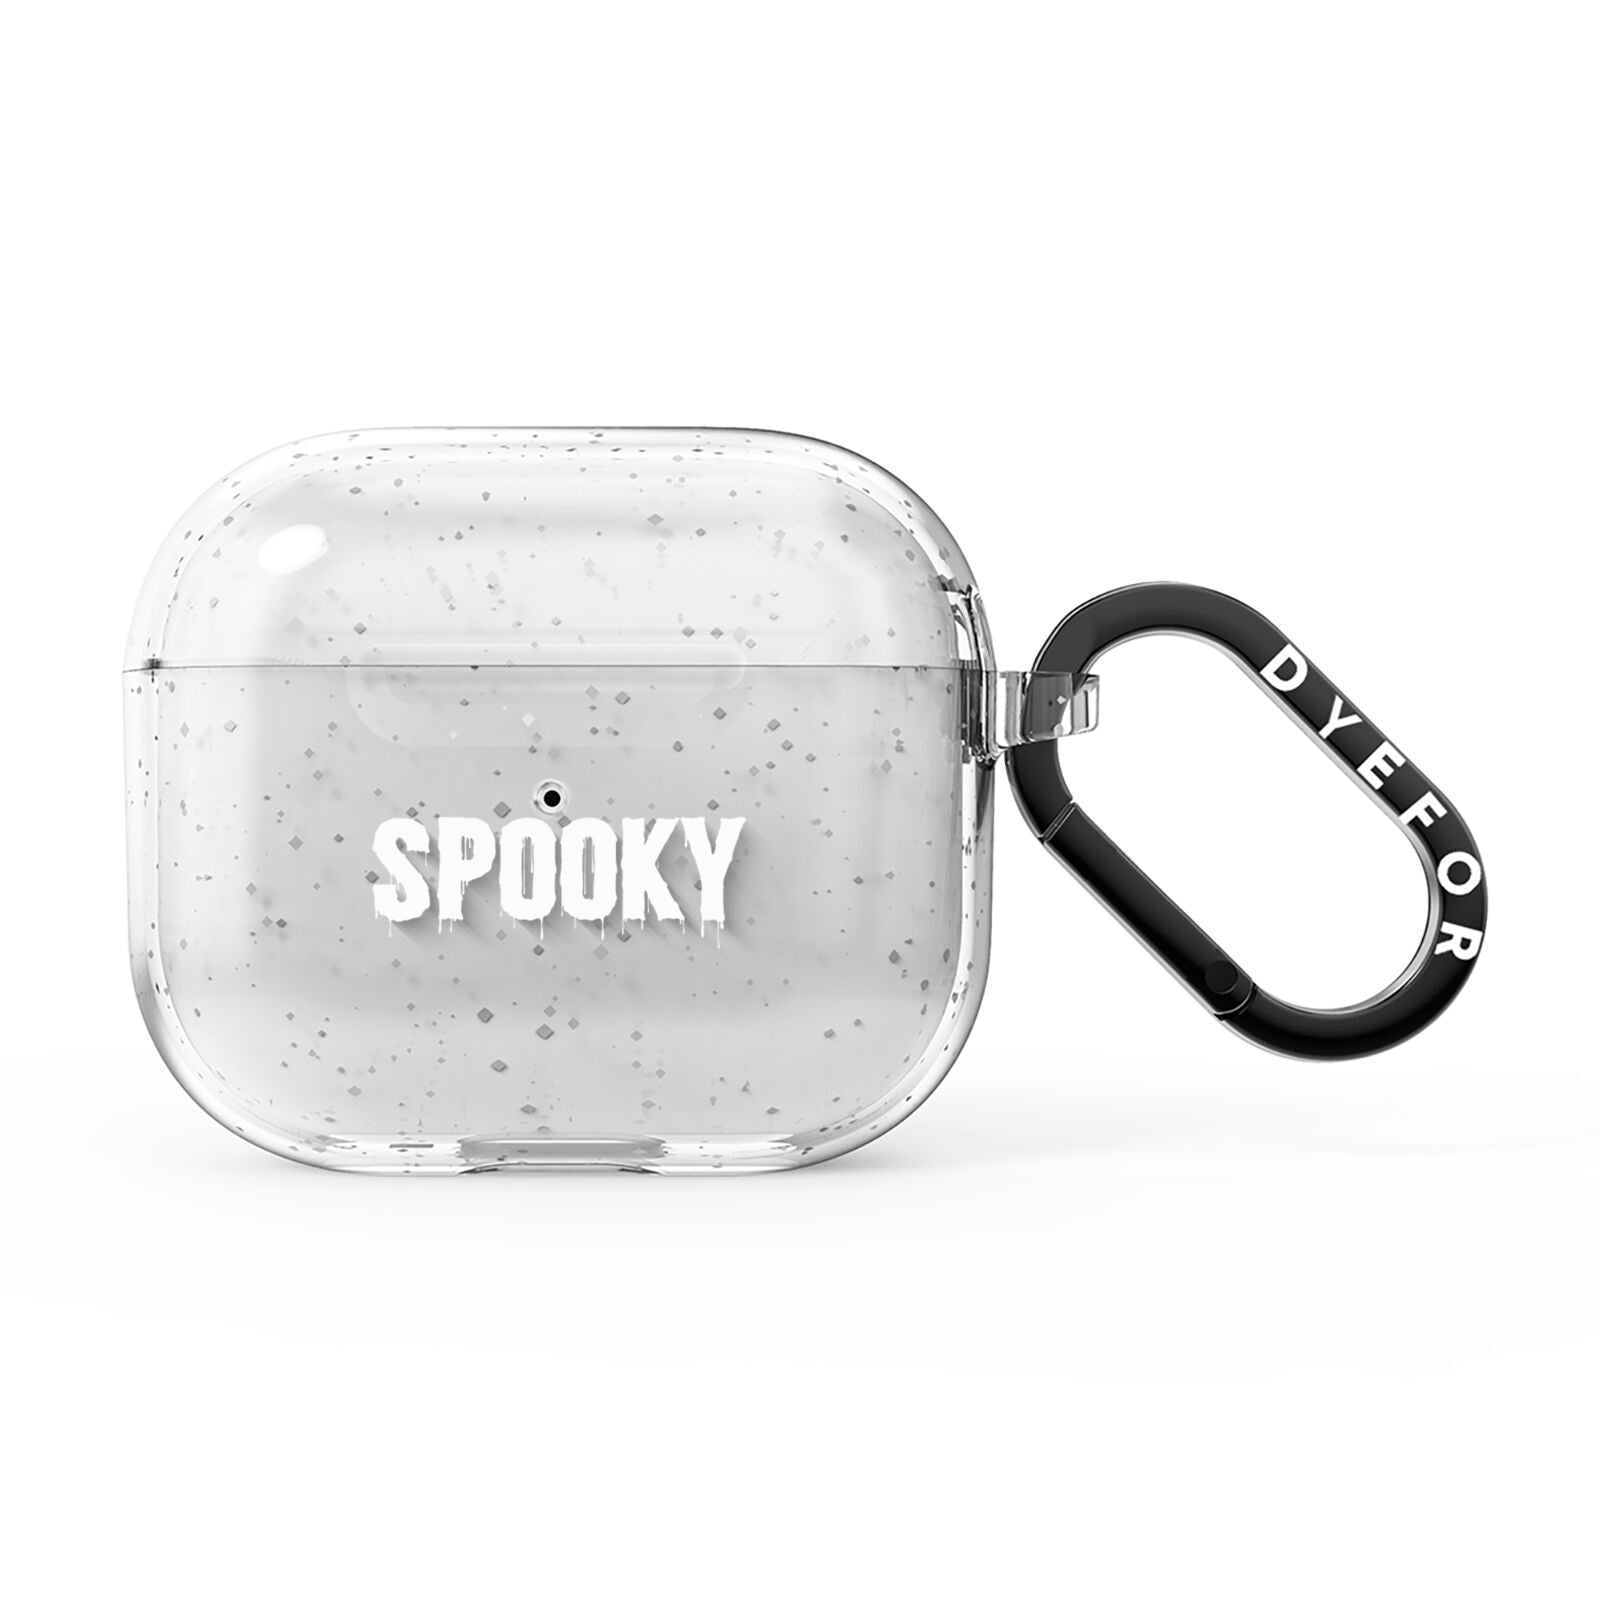 White Dripping Spooky Text AirPods Glitter Case 3rd Gen